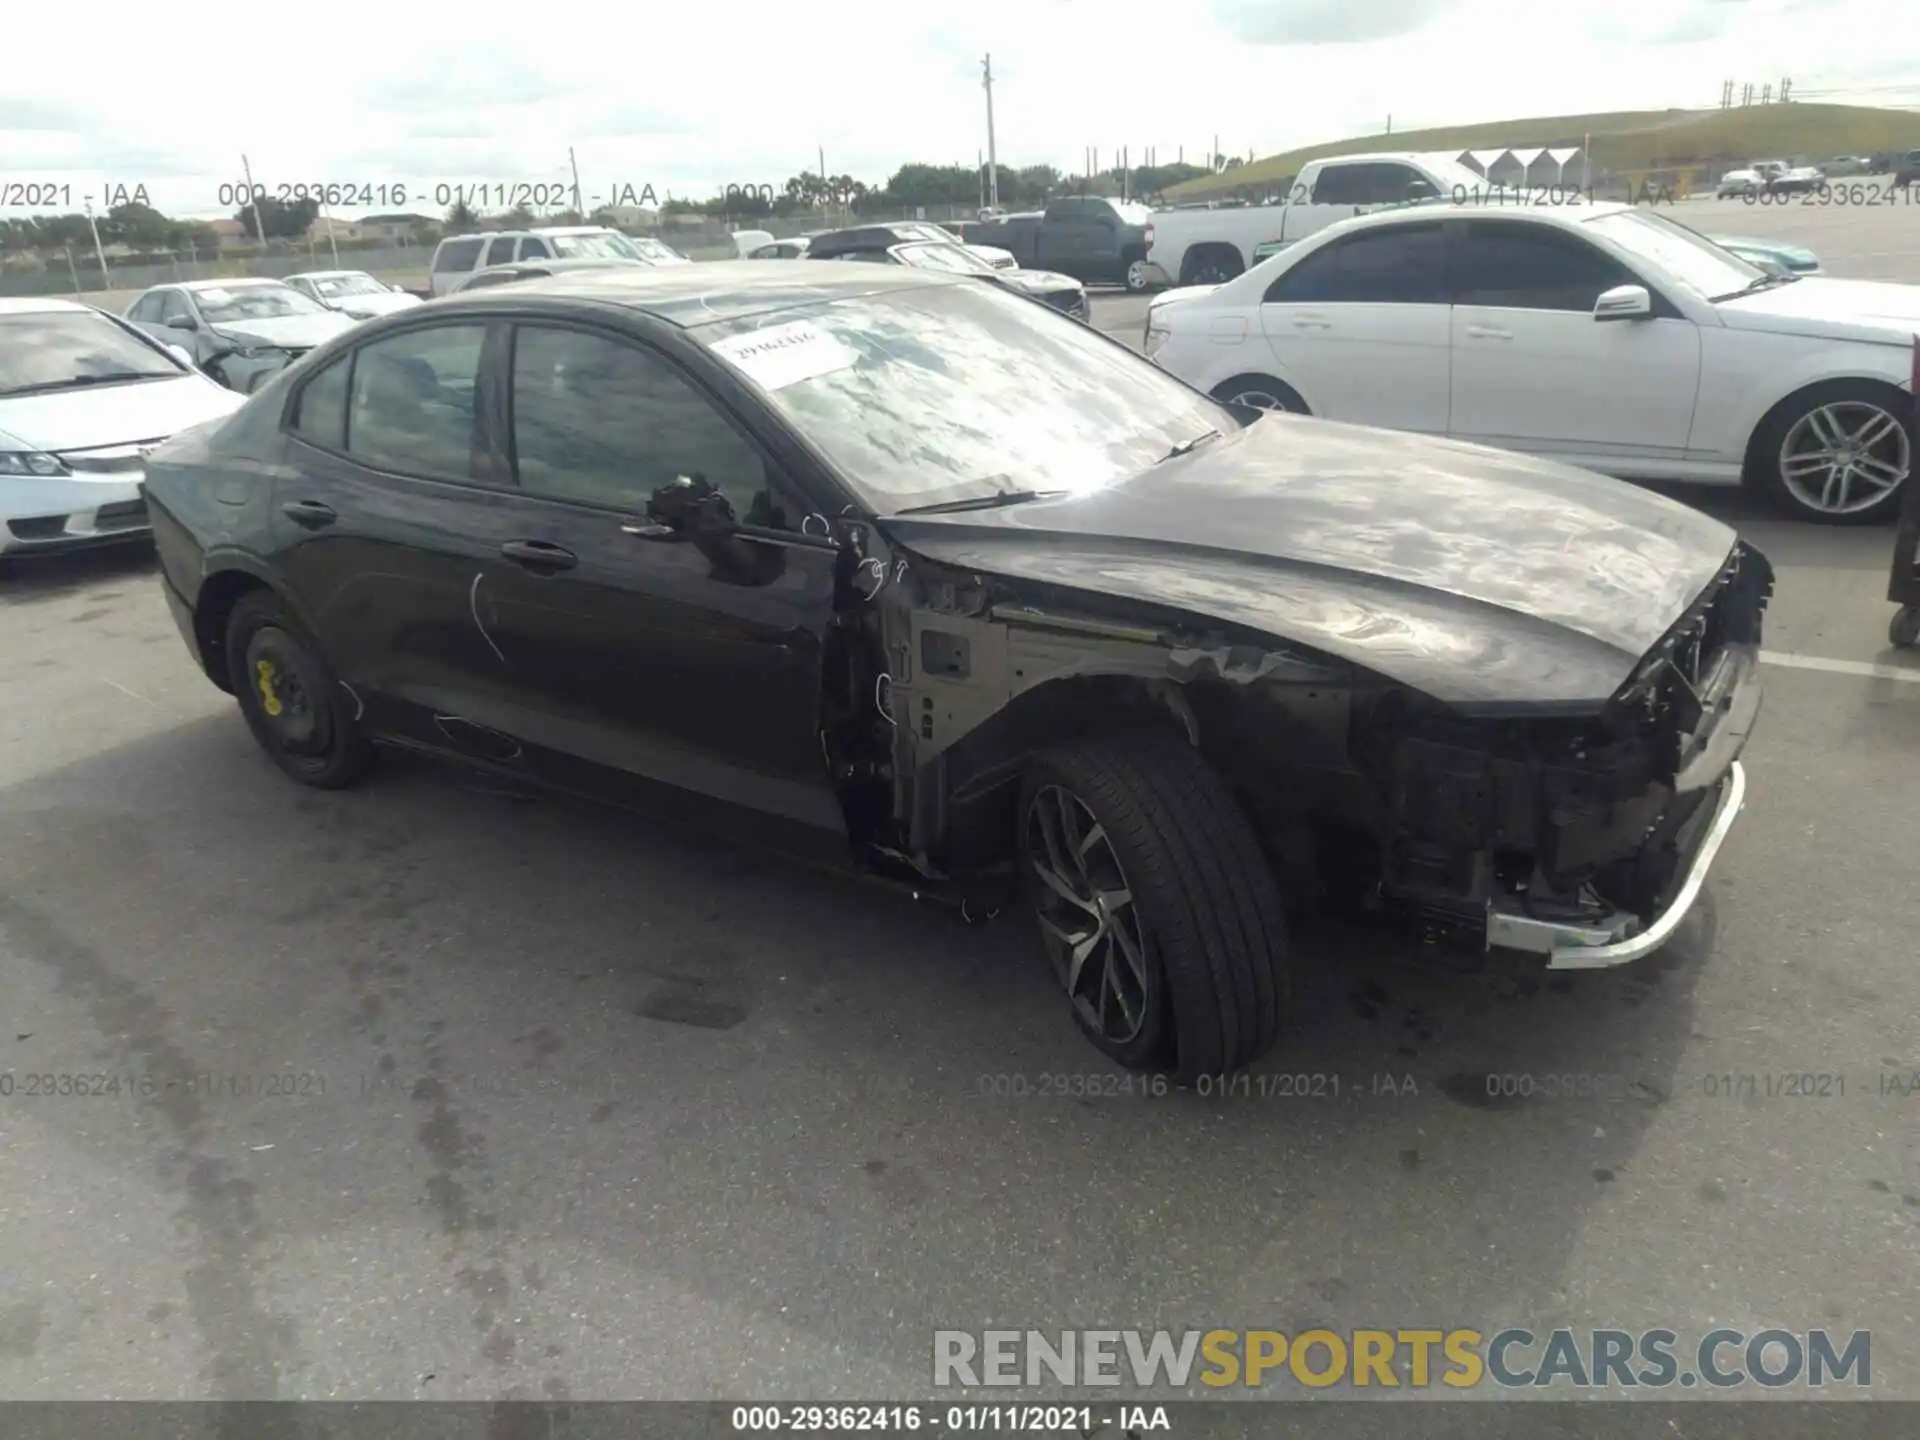 1 Photograph of a damaged car 7JR102FKXLG067002 VOLVO S60 2020